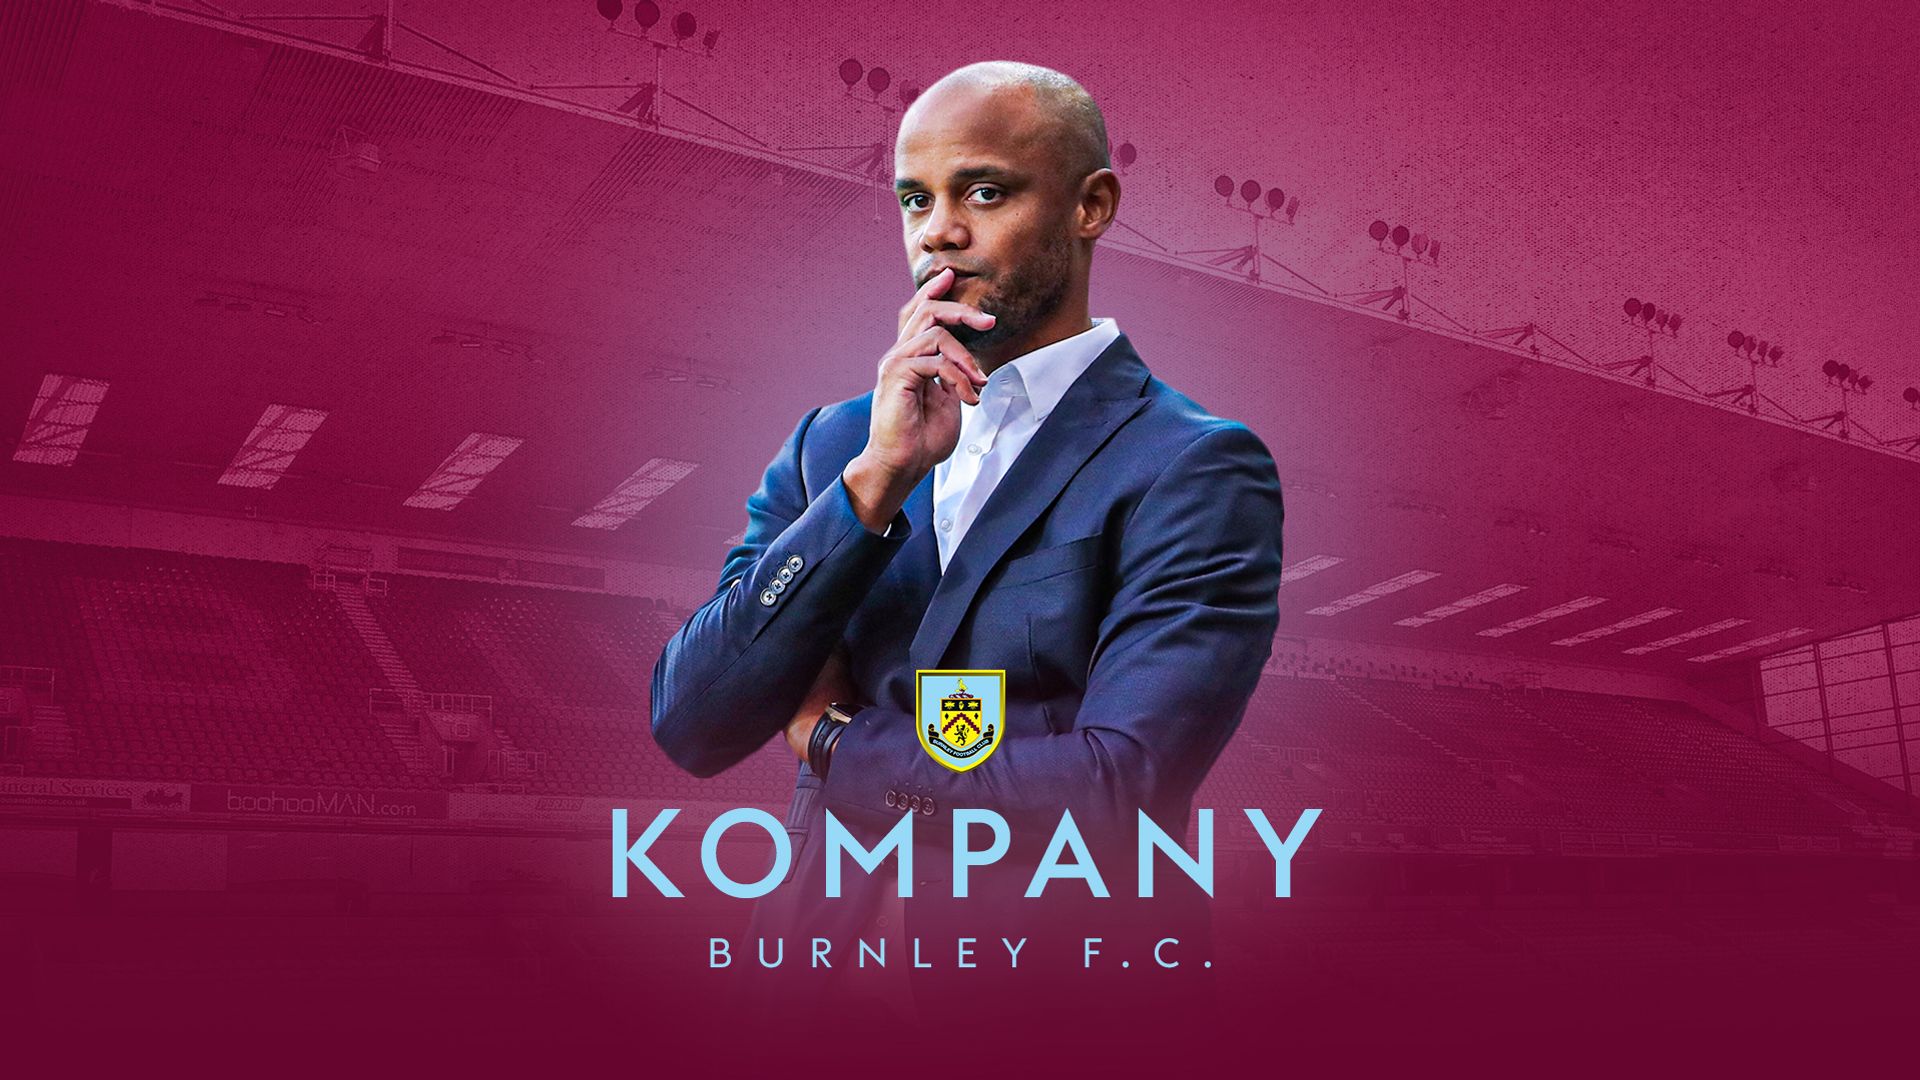 Burnley appoint 'proven leader' Kompany as new manager